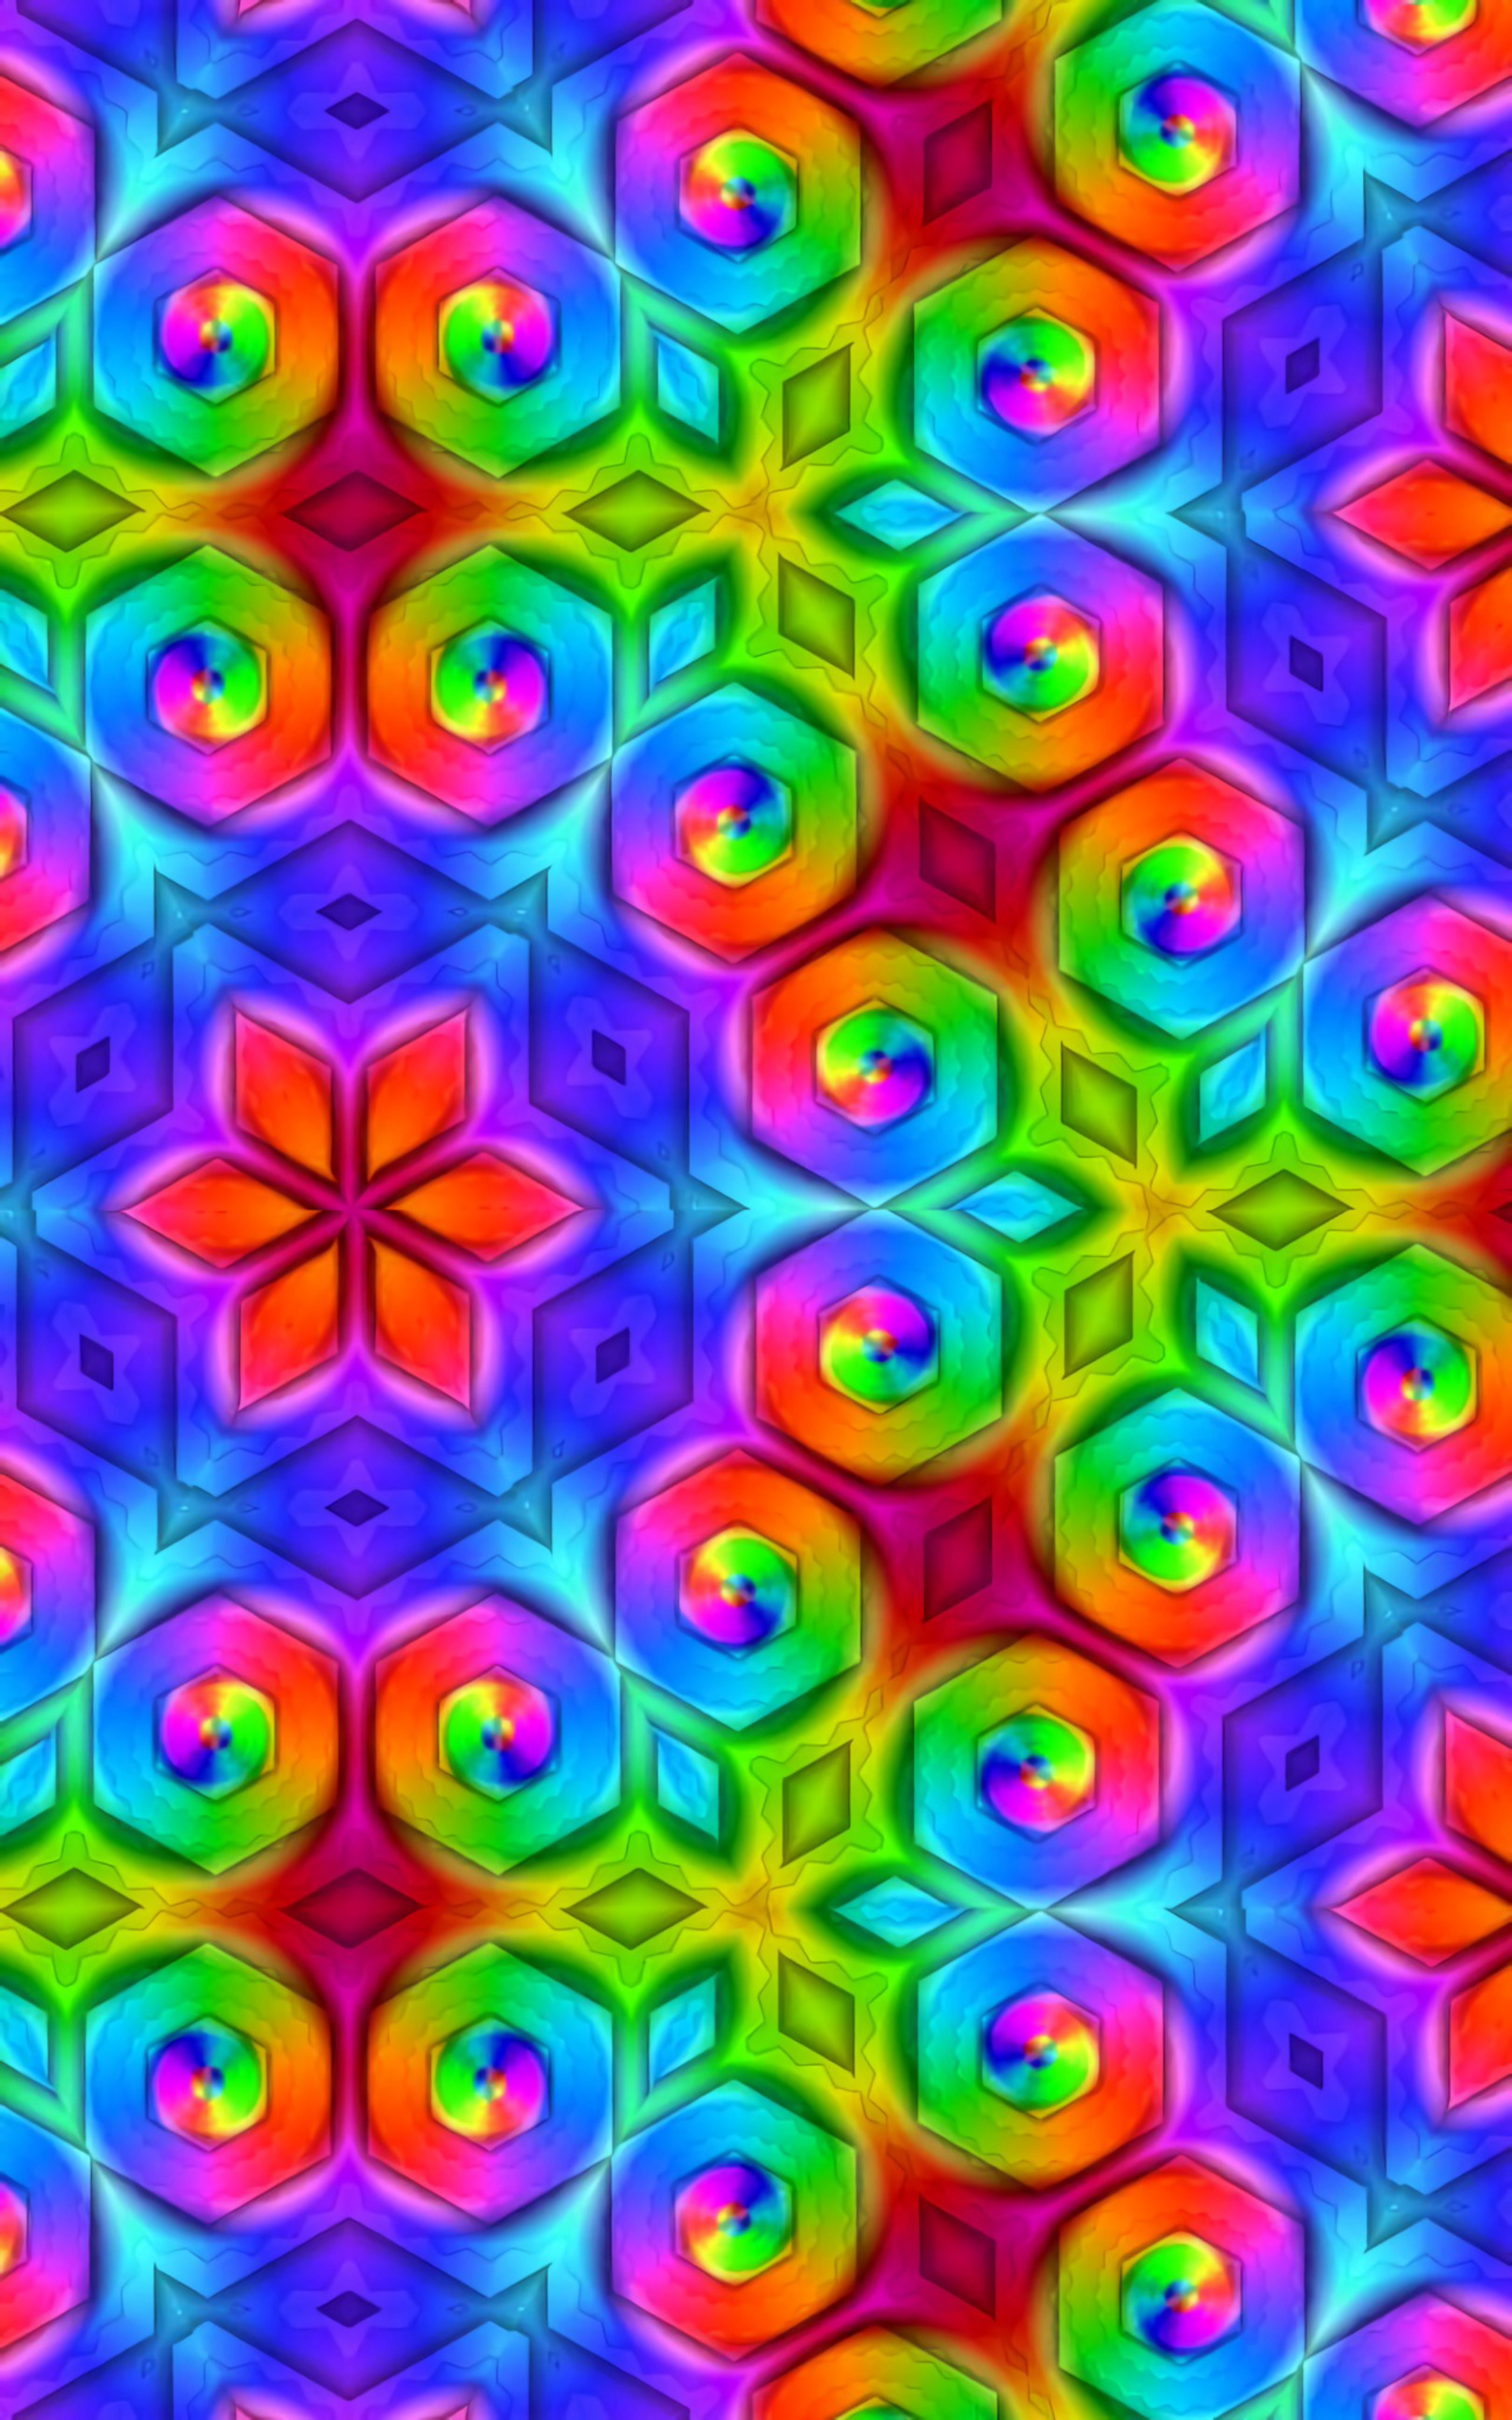 motley, multicolored, textures, bright, pattern, texture, saturated, ornament